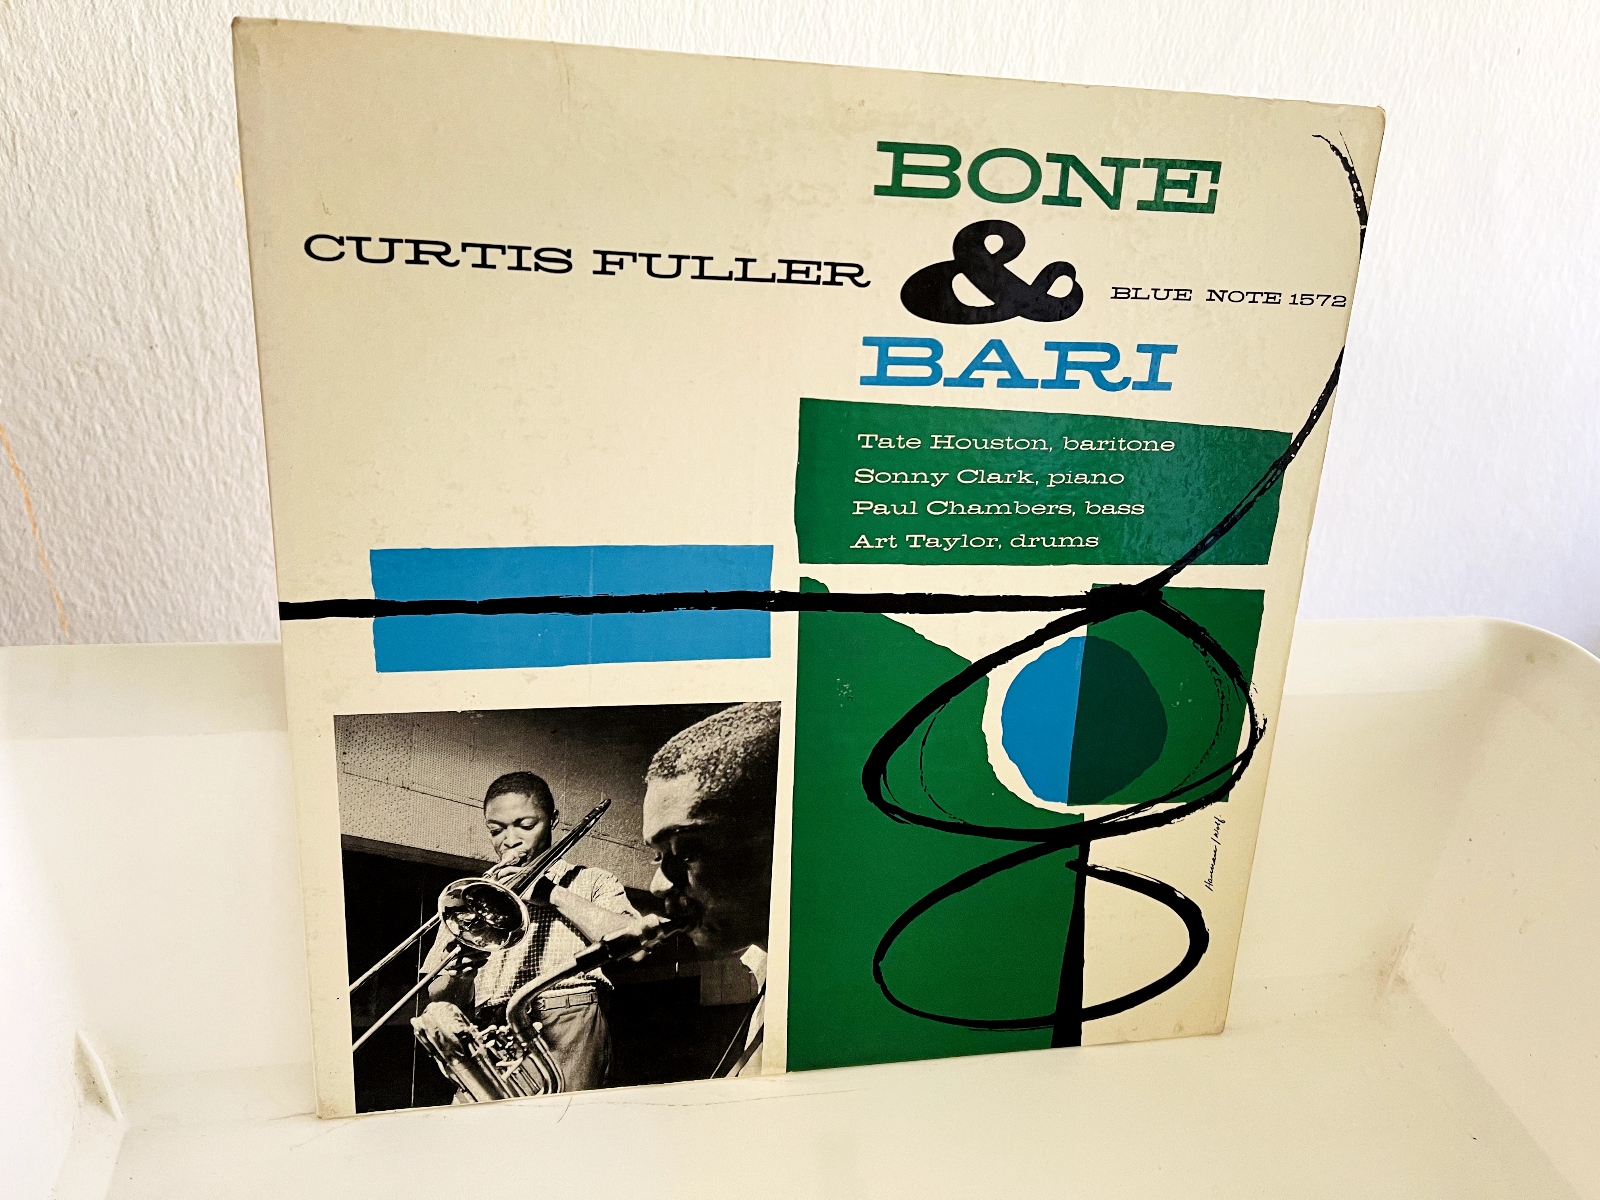 Pic 1 CURTIS FULLER - BONE & BARI - BLUE NOTE -FIRST MONO EDITION -LOOKS NEAR UNPLAYED